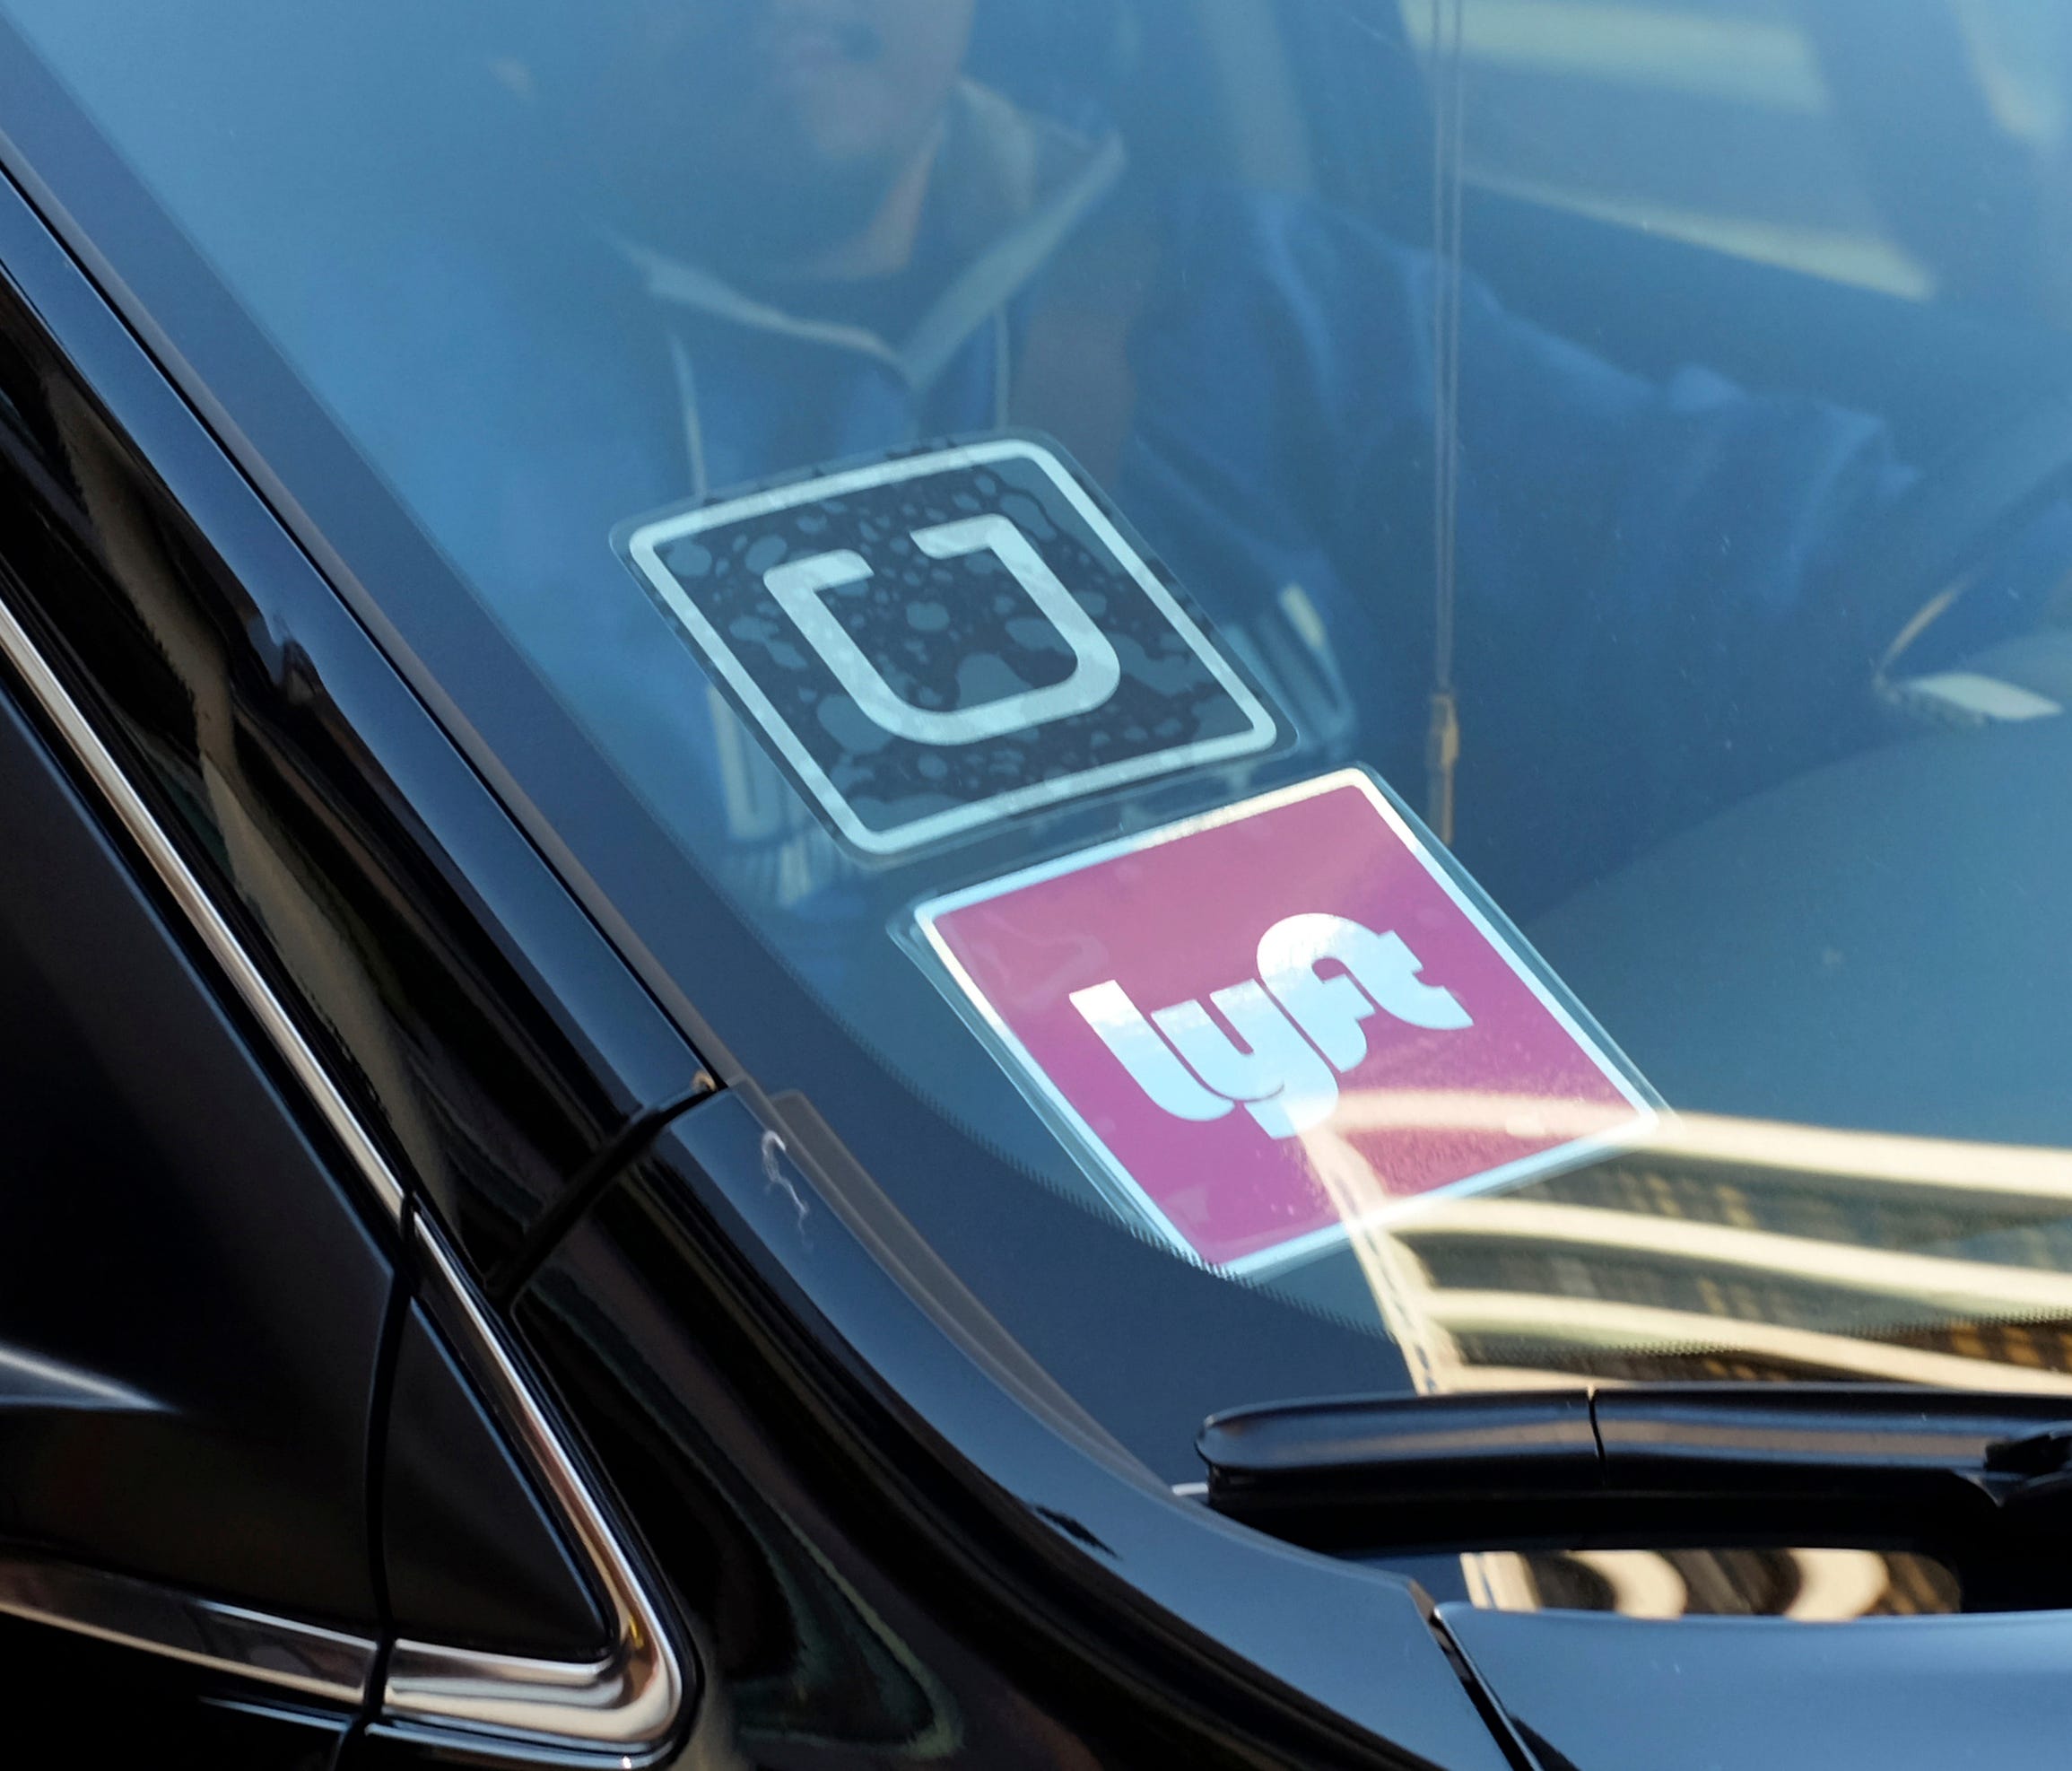 A recent analysis by the MIT Center for Energy and Environmental Policy Research suggests Uber and Lyft drivers are taking home about $3.37 an hour.